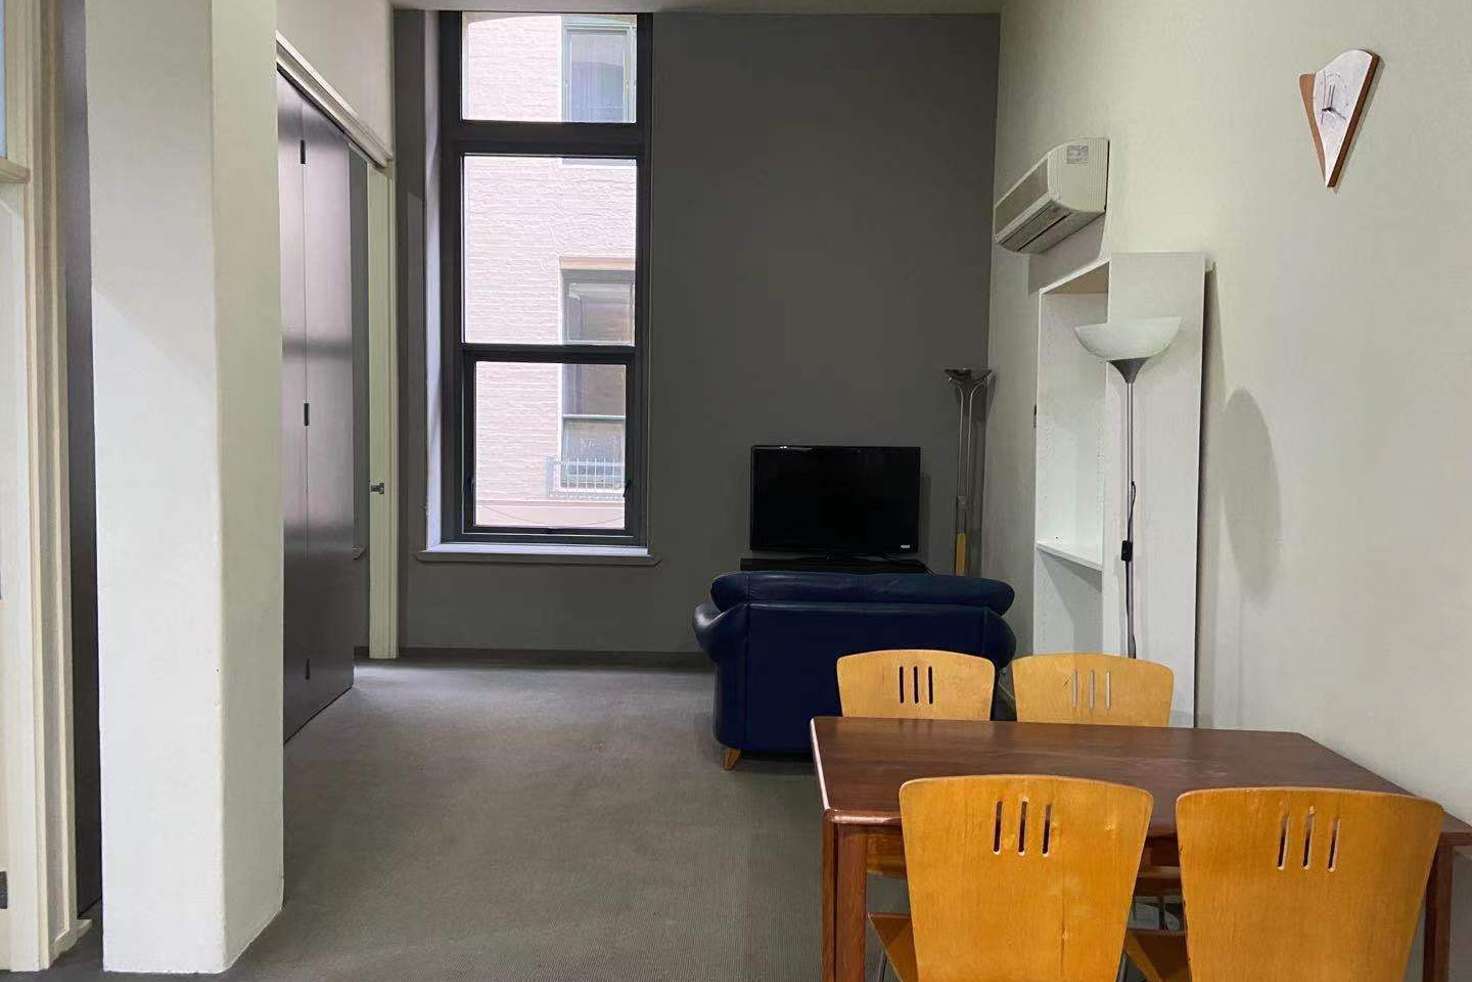 Main view of Homely apartment listing, 105/9 Degraves street, Melbourne VIC 3000